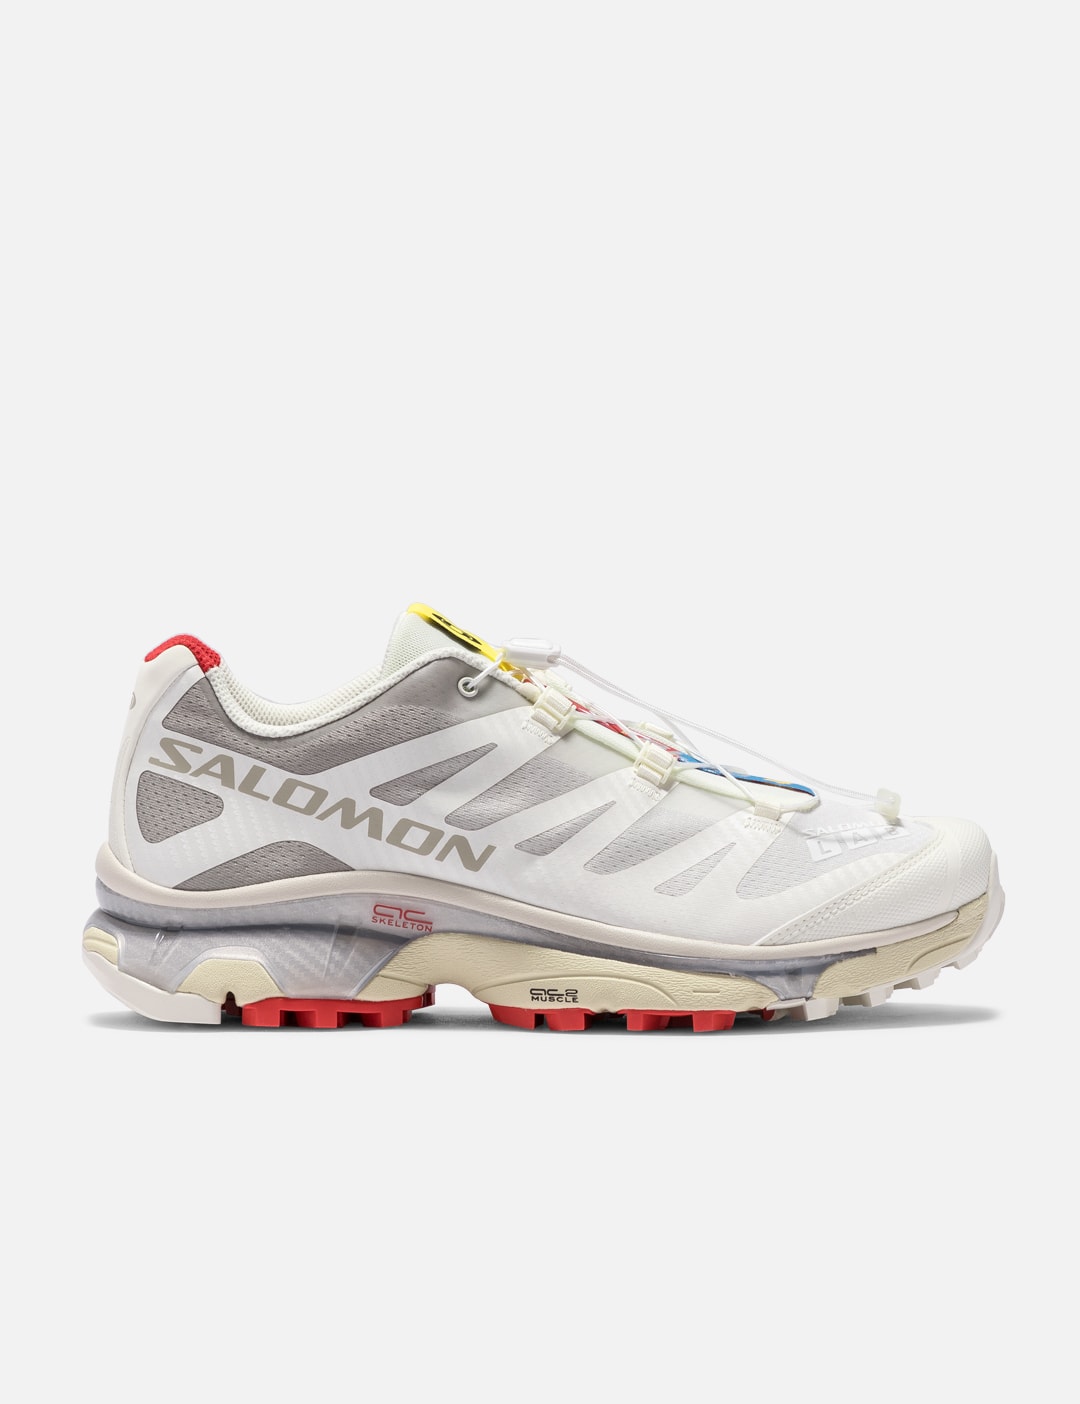 Salomon - XT-4 OG | - Globally Curated Fashion and Lifestyle by Hypebeast